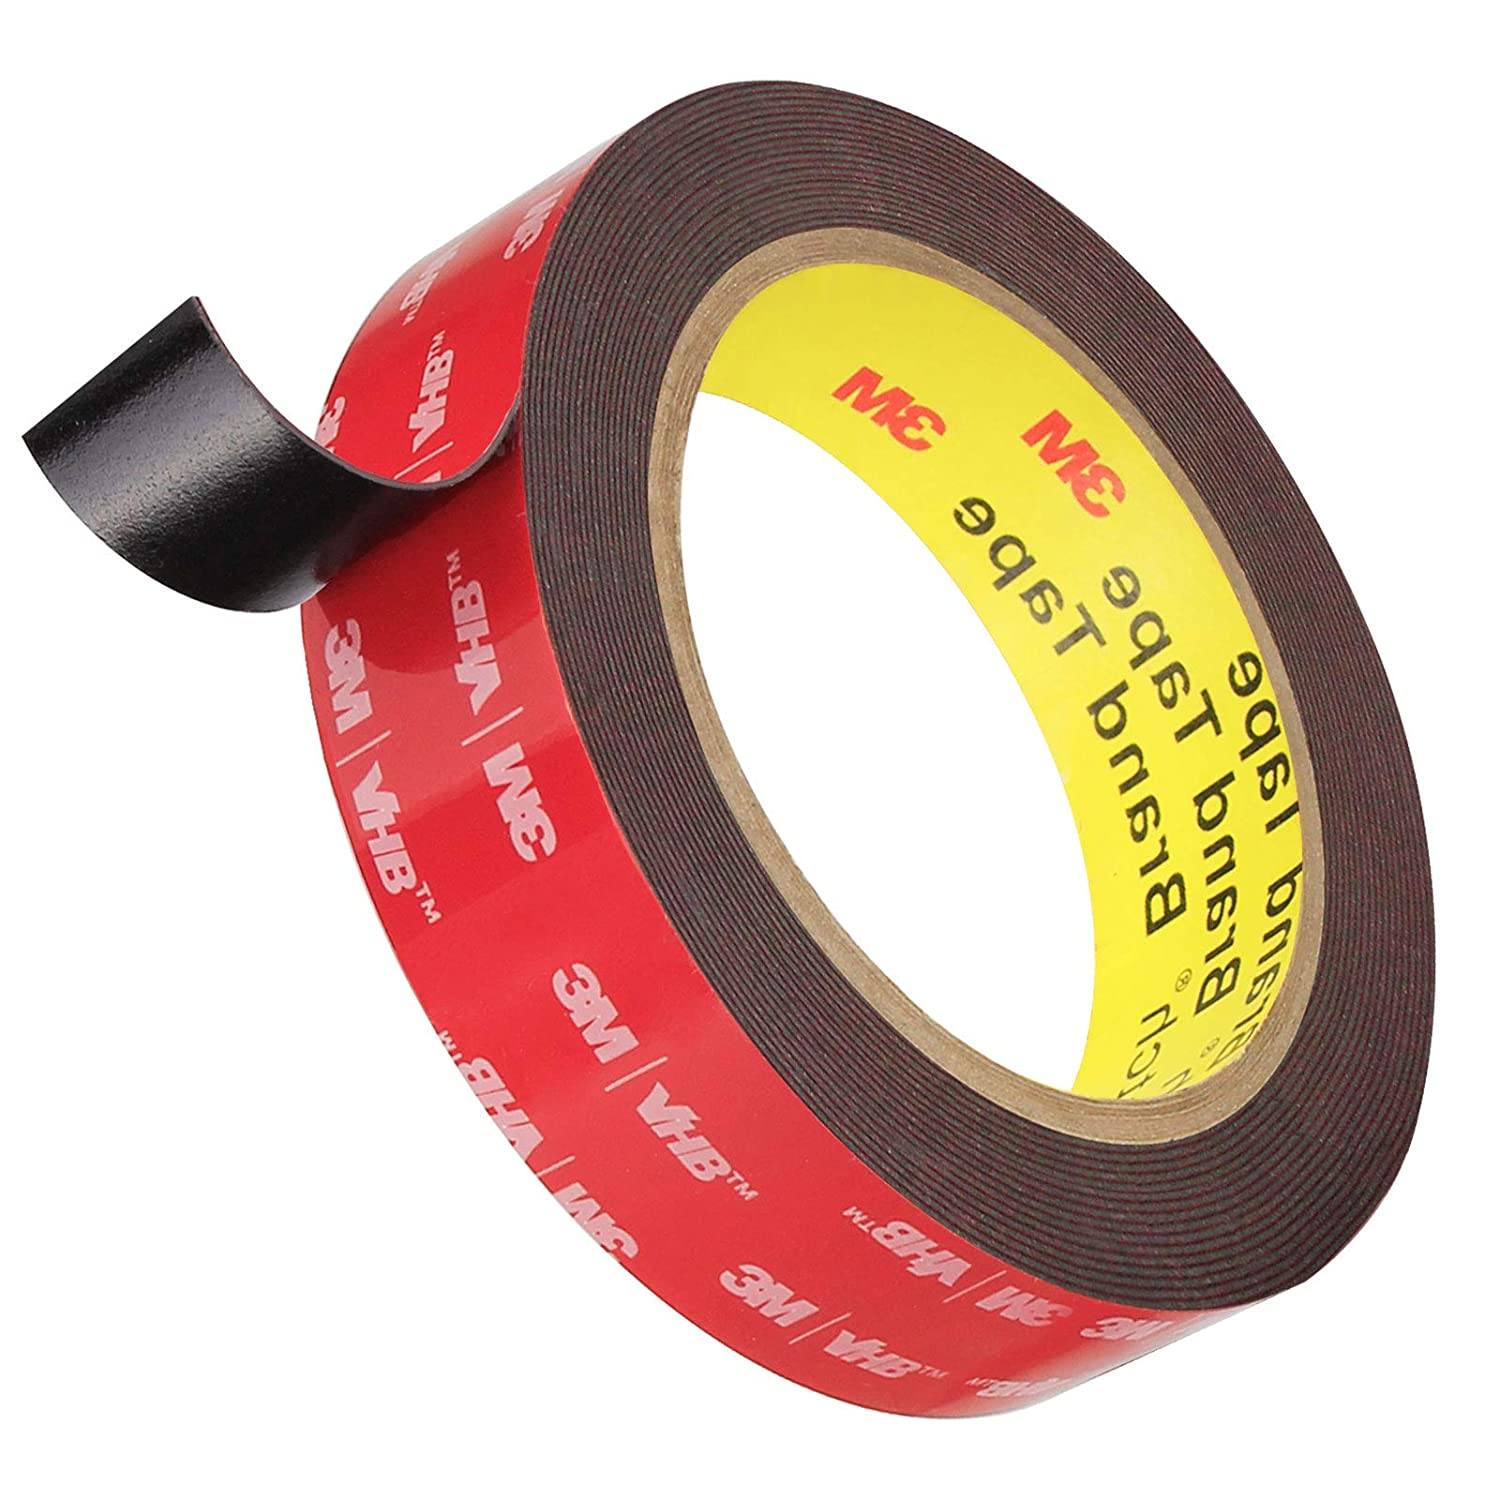 Hitlights Double Sided Heavy Duty Waterproof Mounting Foam Tape 164ft Length 094in Width Strong Adhesive Tape for Car Wall LED Strip Light Home/Office